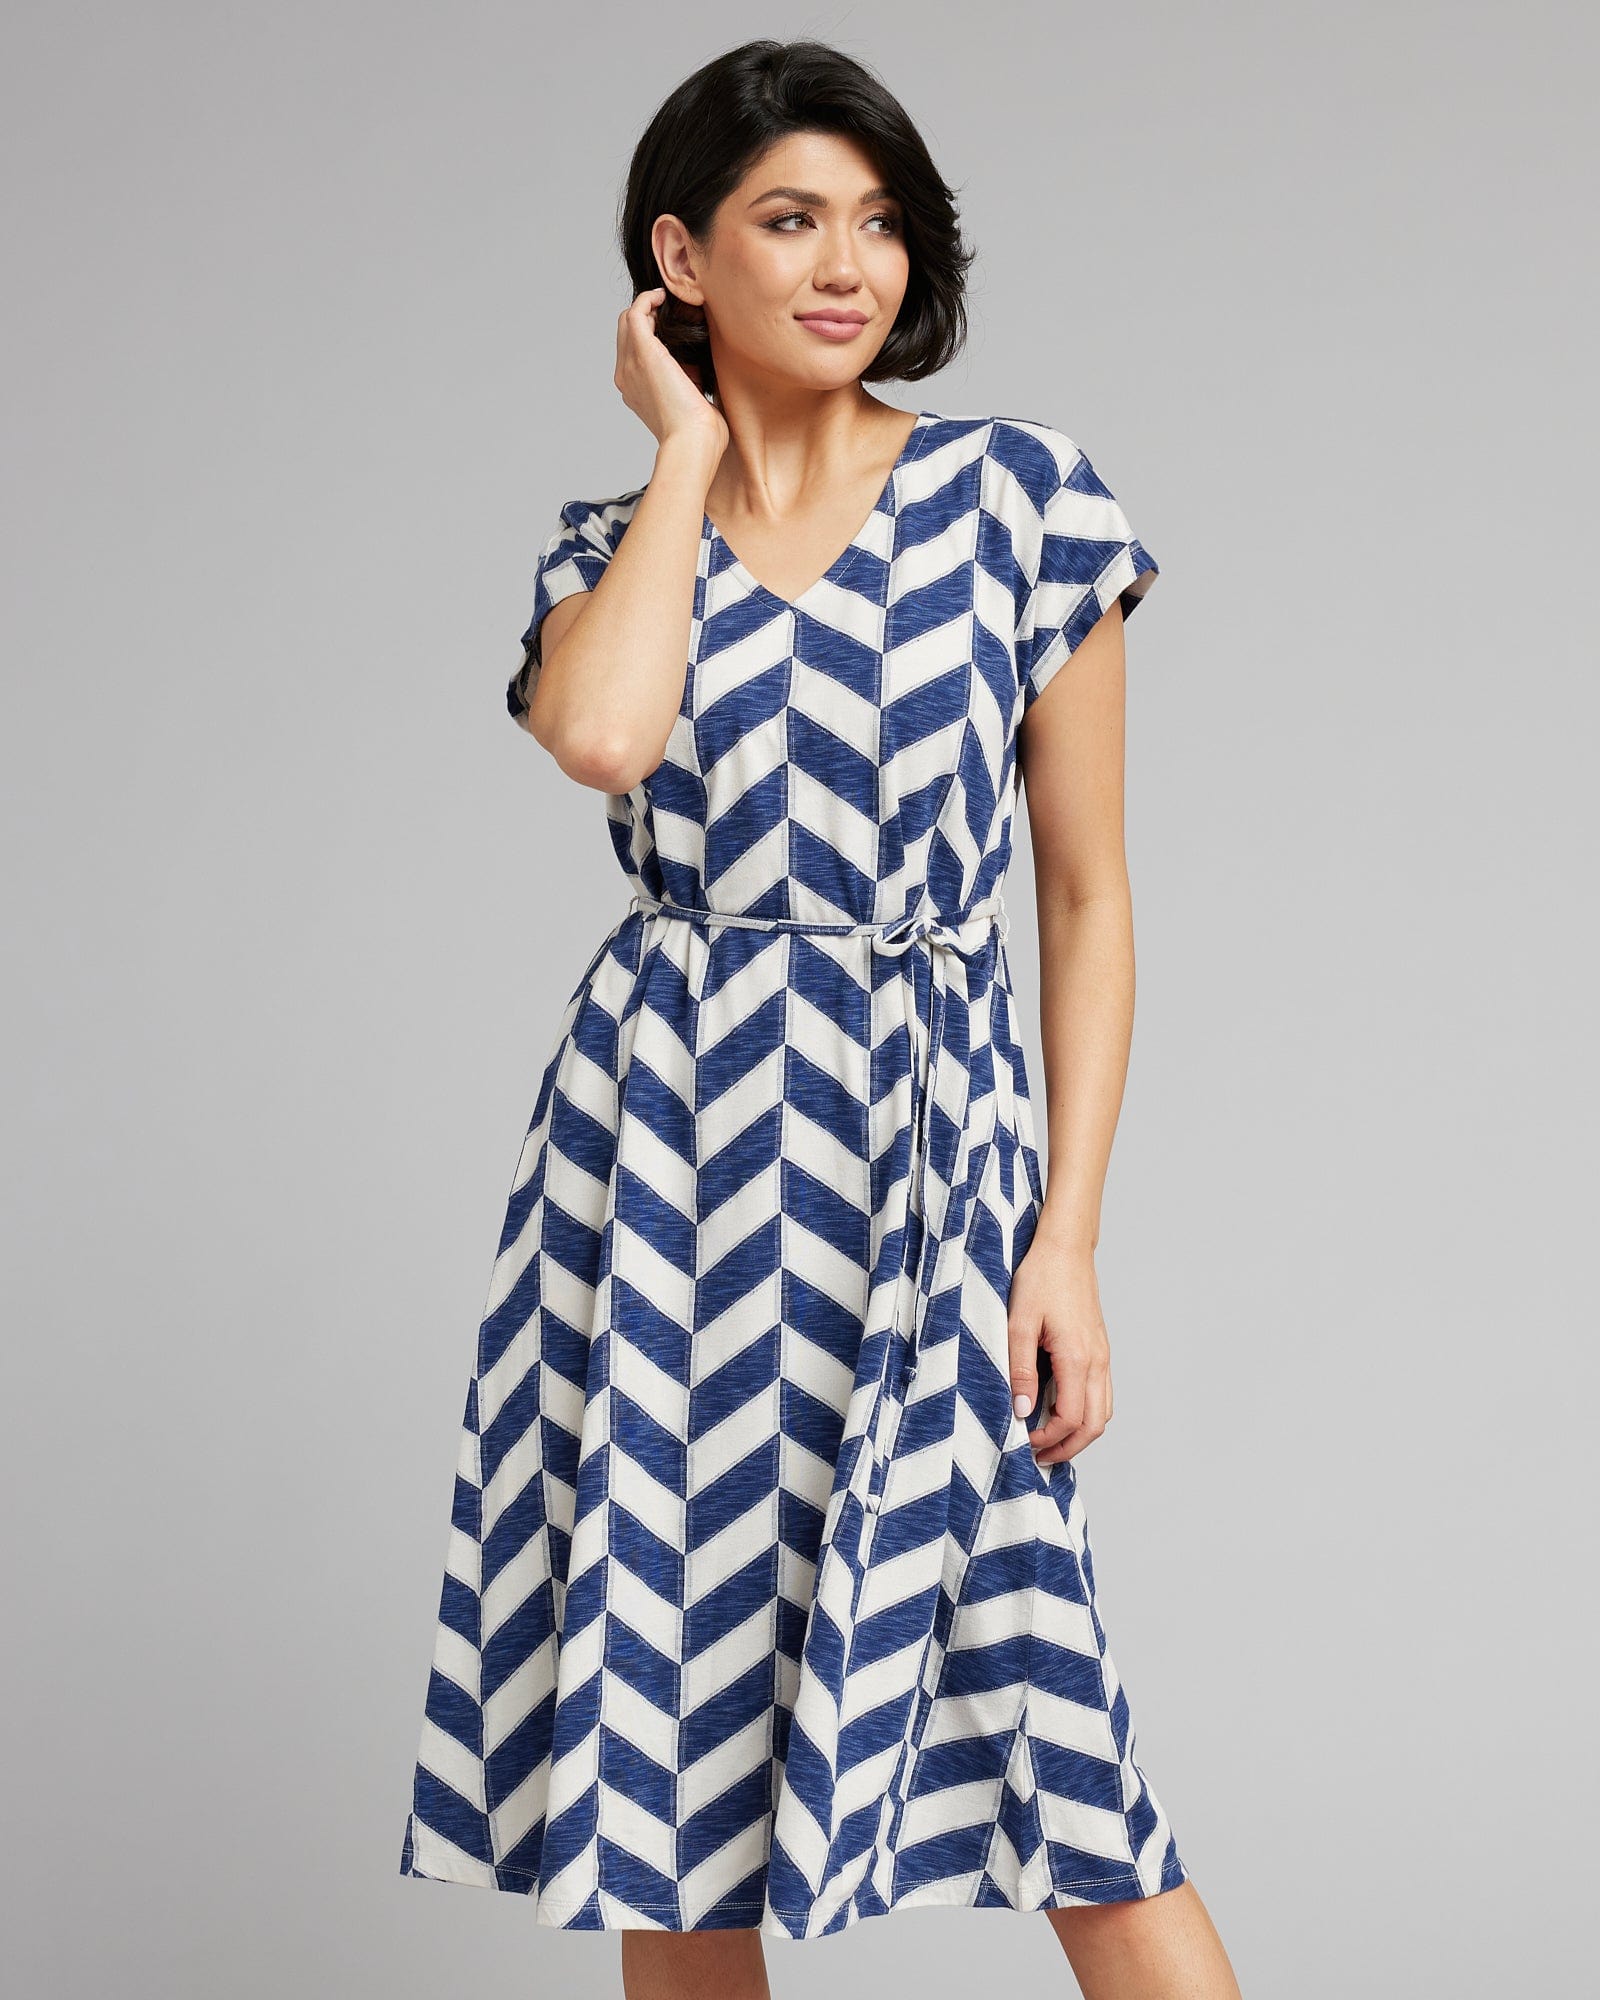 Woman in a short sleeve, midi-length, blue and white chevron patterned dress